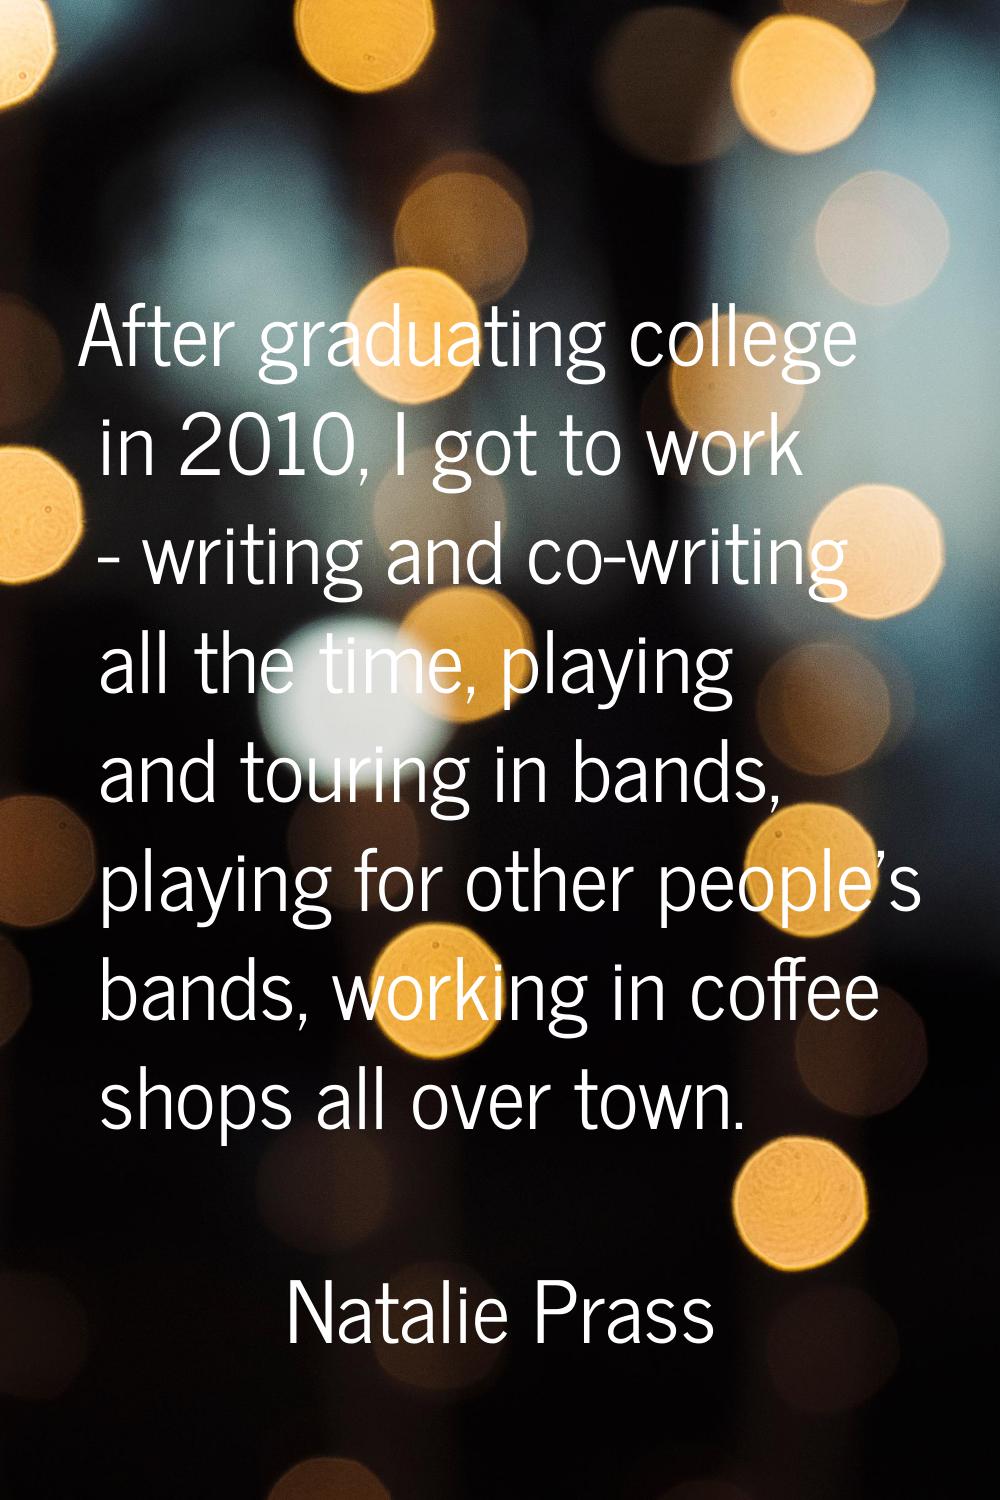 After graduating college in 2010, I got to work - writing and co-writing all the time, playing and 